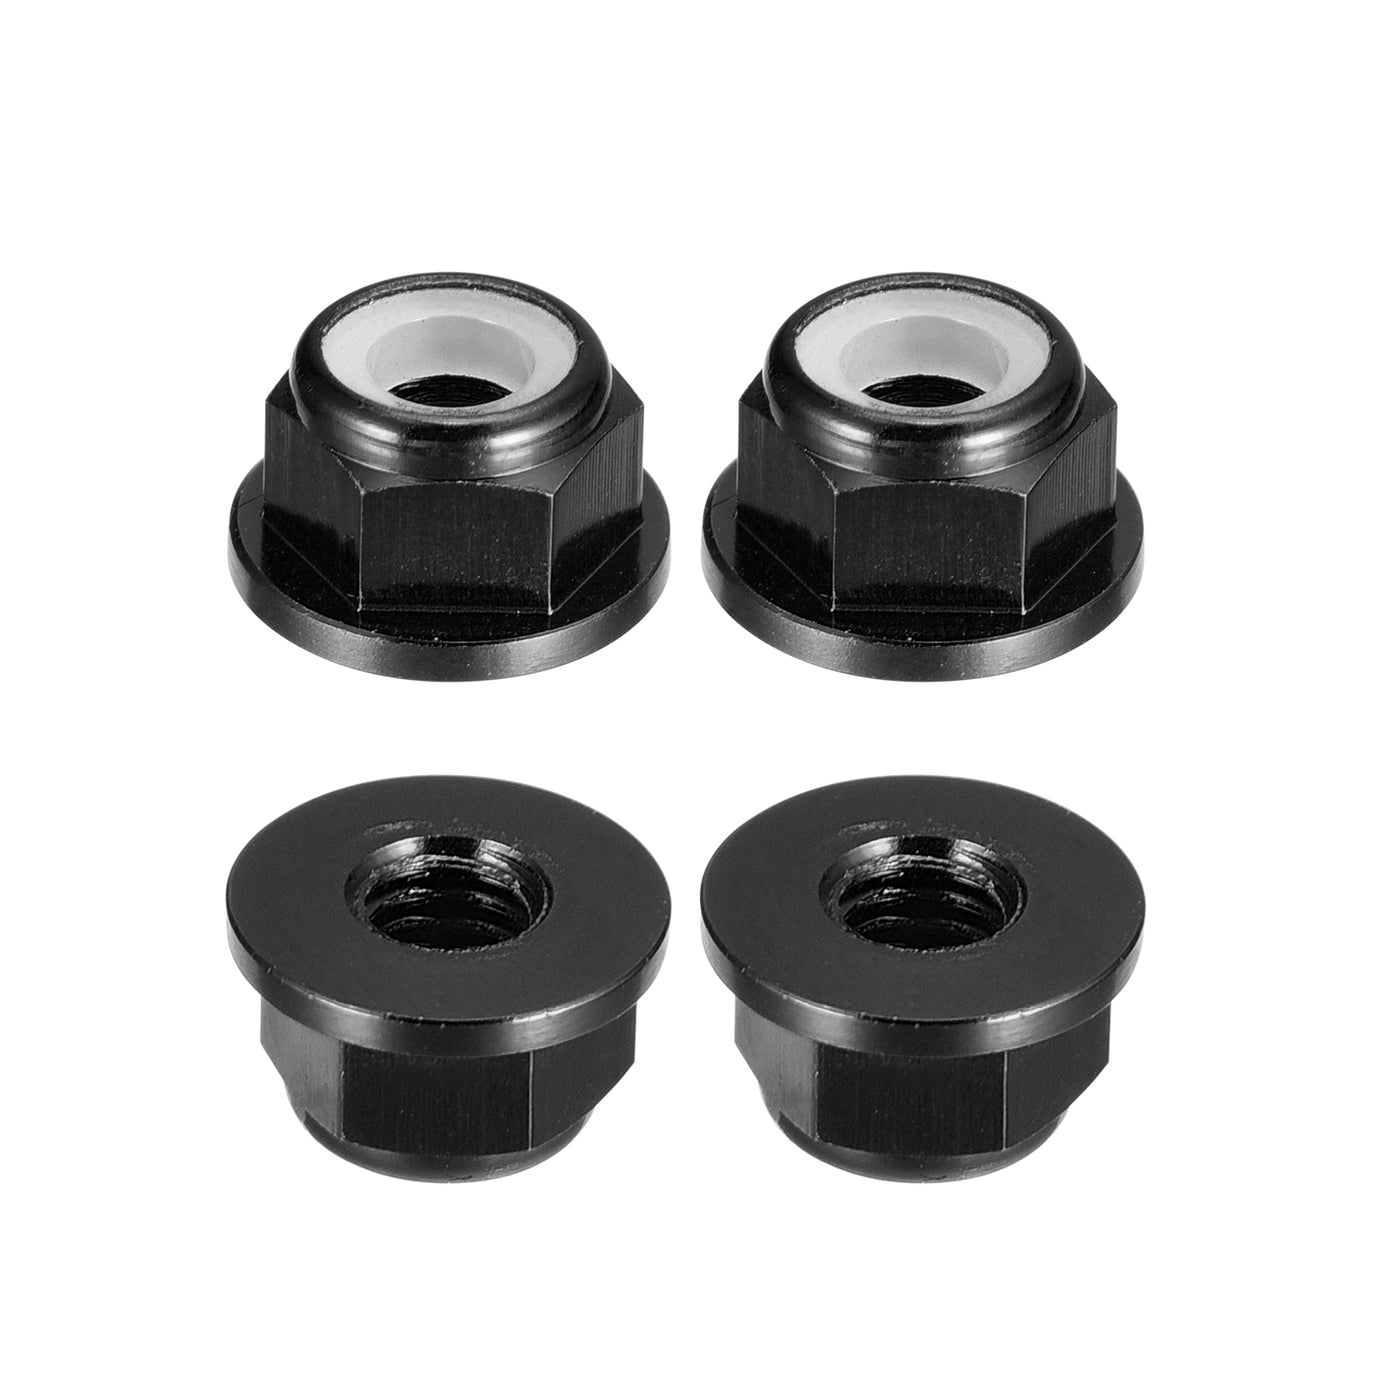 uxcell Uxcell Nylon Insert Hex Lock Nuts, 4pcs - M5 x 0.8mm Aluminum Alloy Self-Locking Nut, Anodizing Flange Lock Nut for Fasteners (Black)